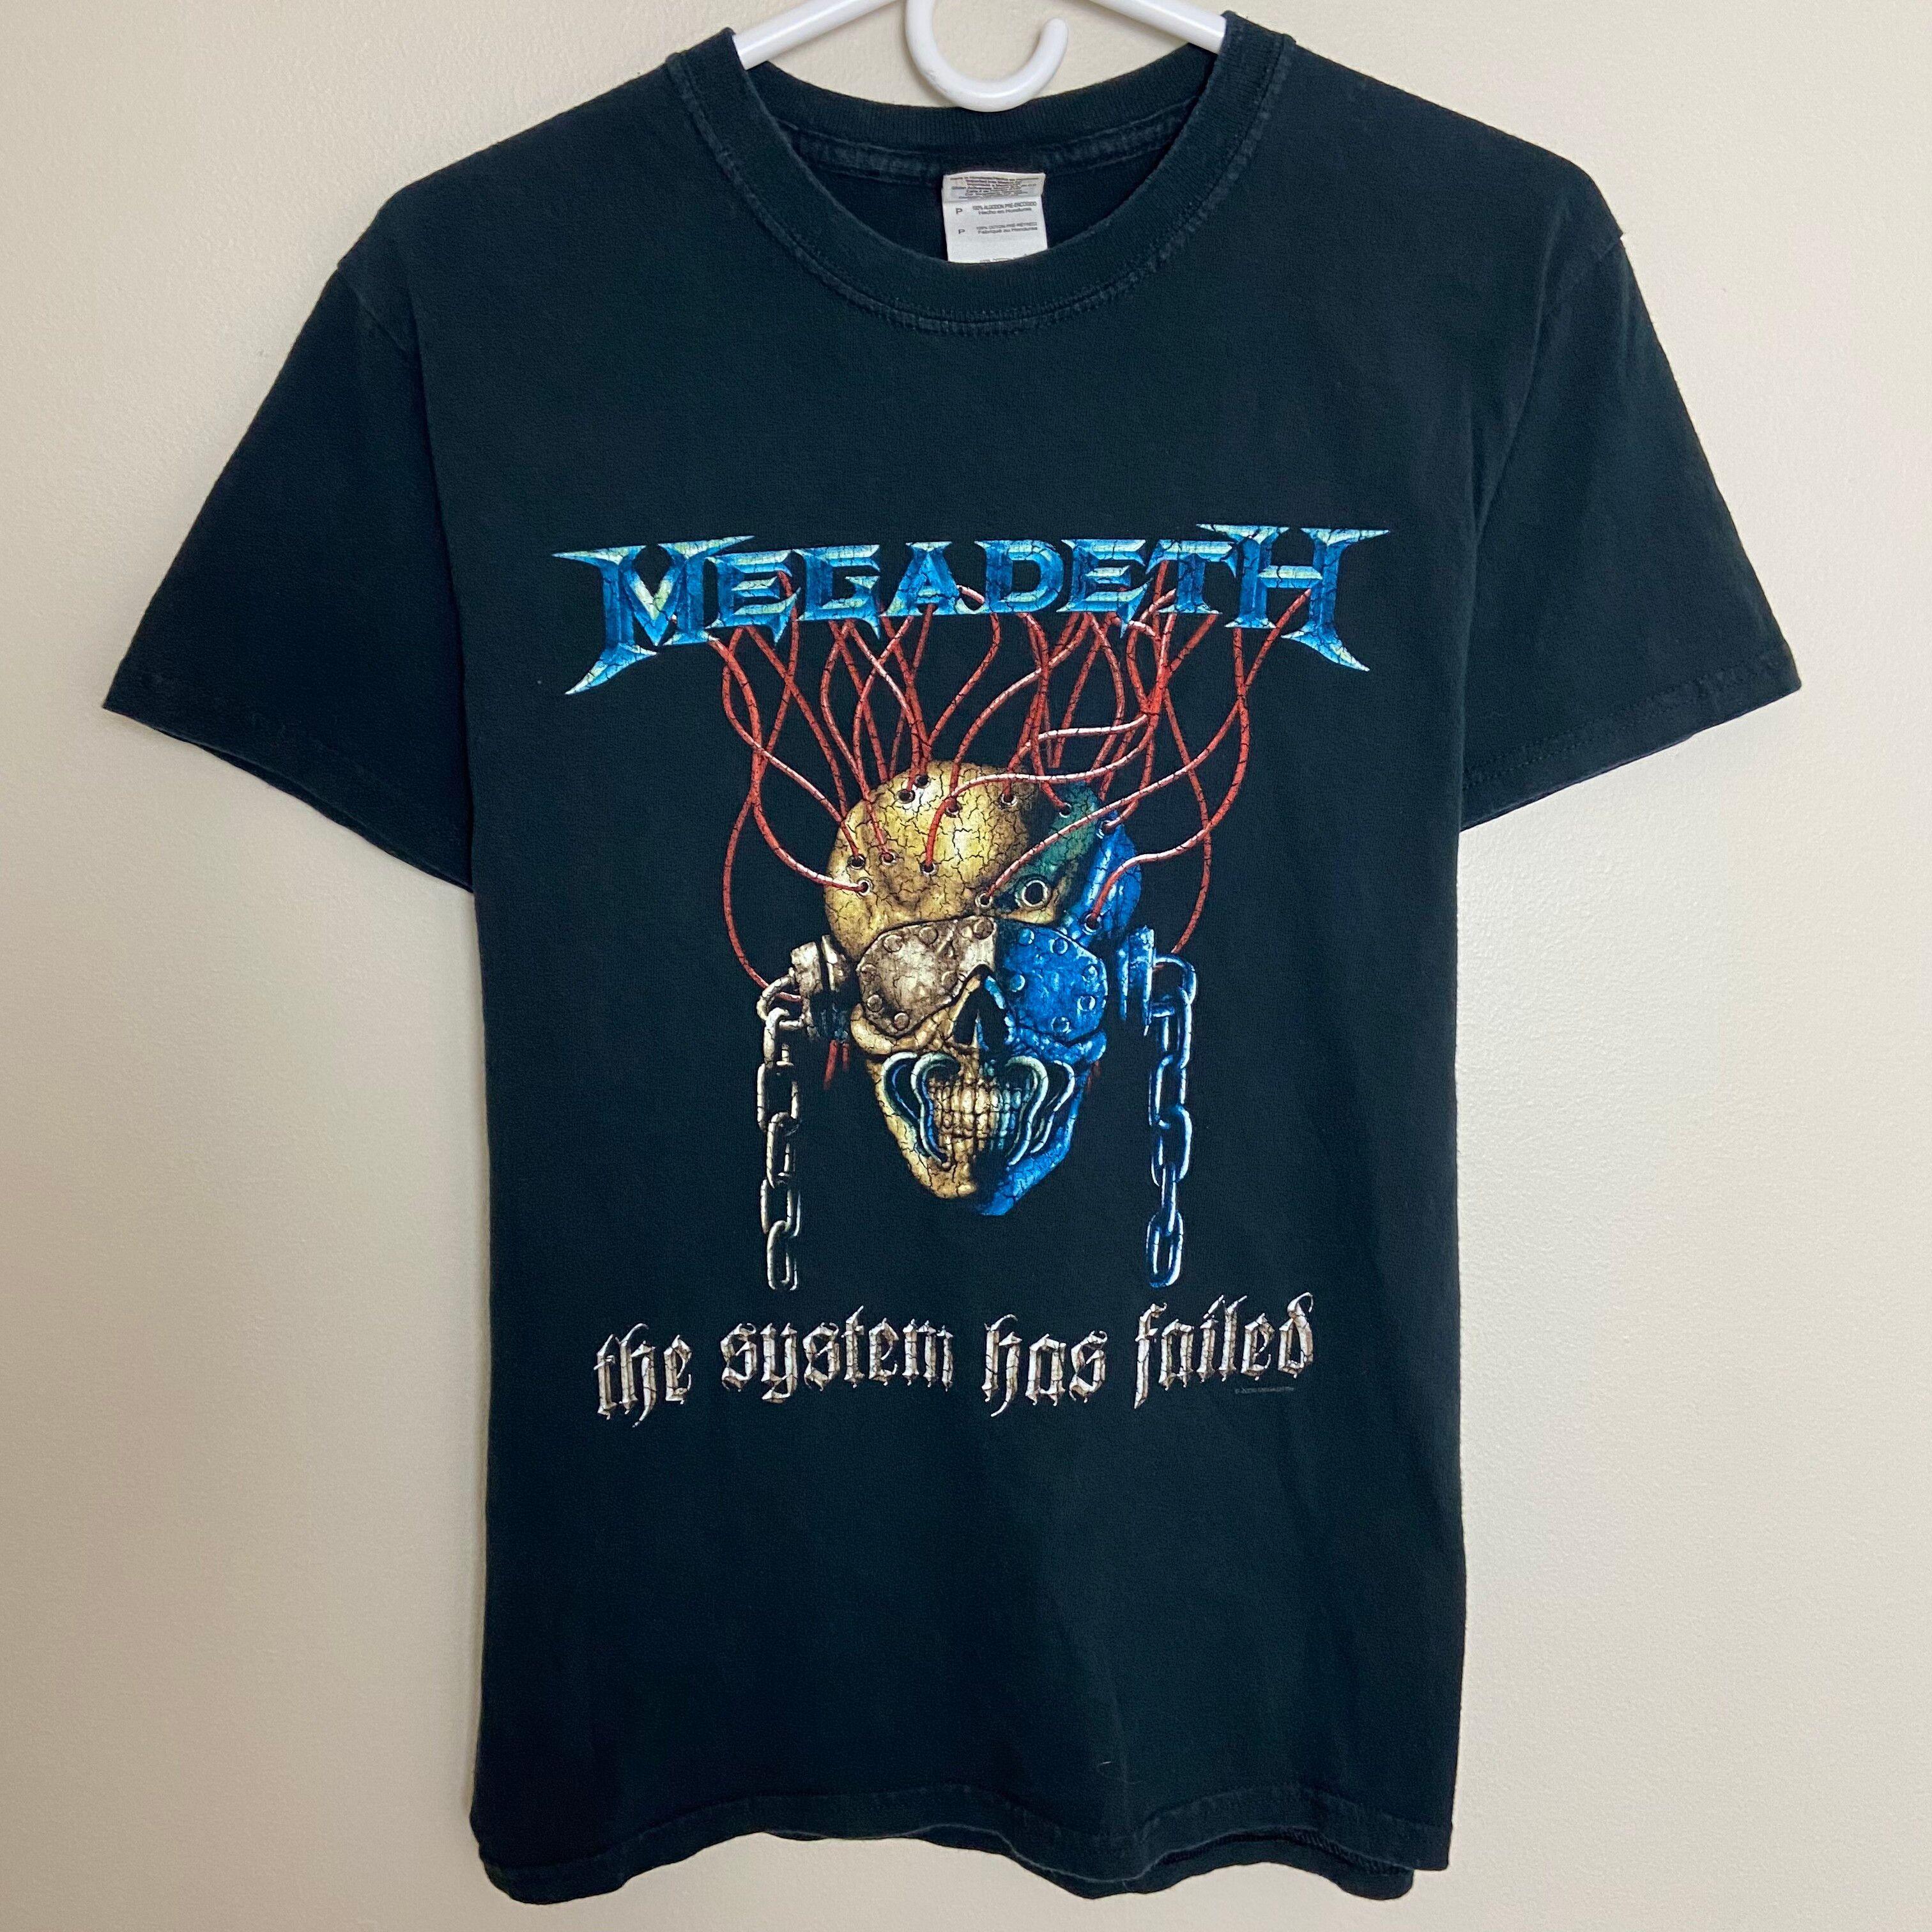 Vintage 2009 Megadeth The System Has Failed Tee Size US S / EU 44-46 / 1 - 1 Preview